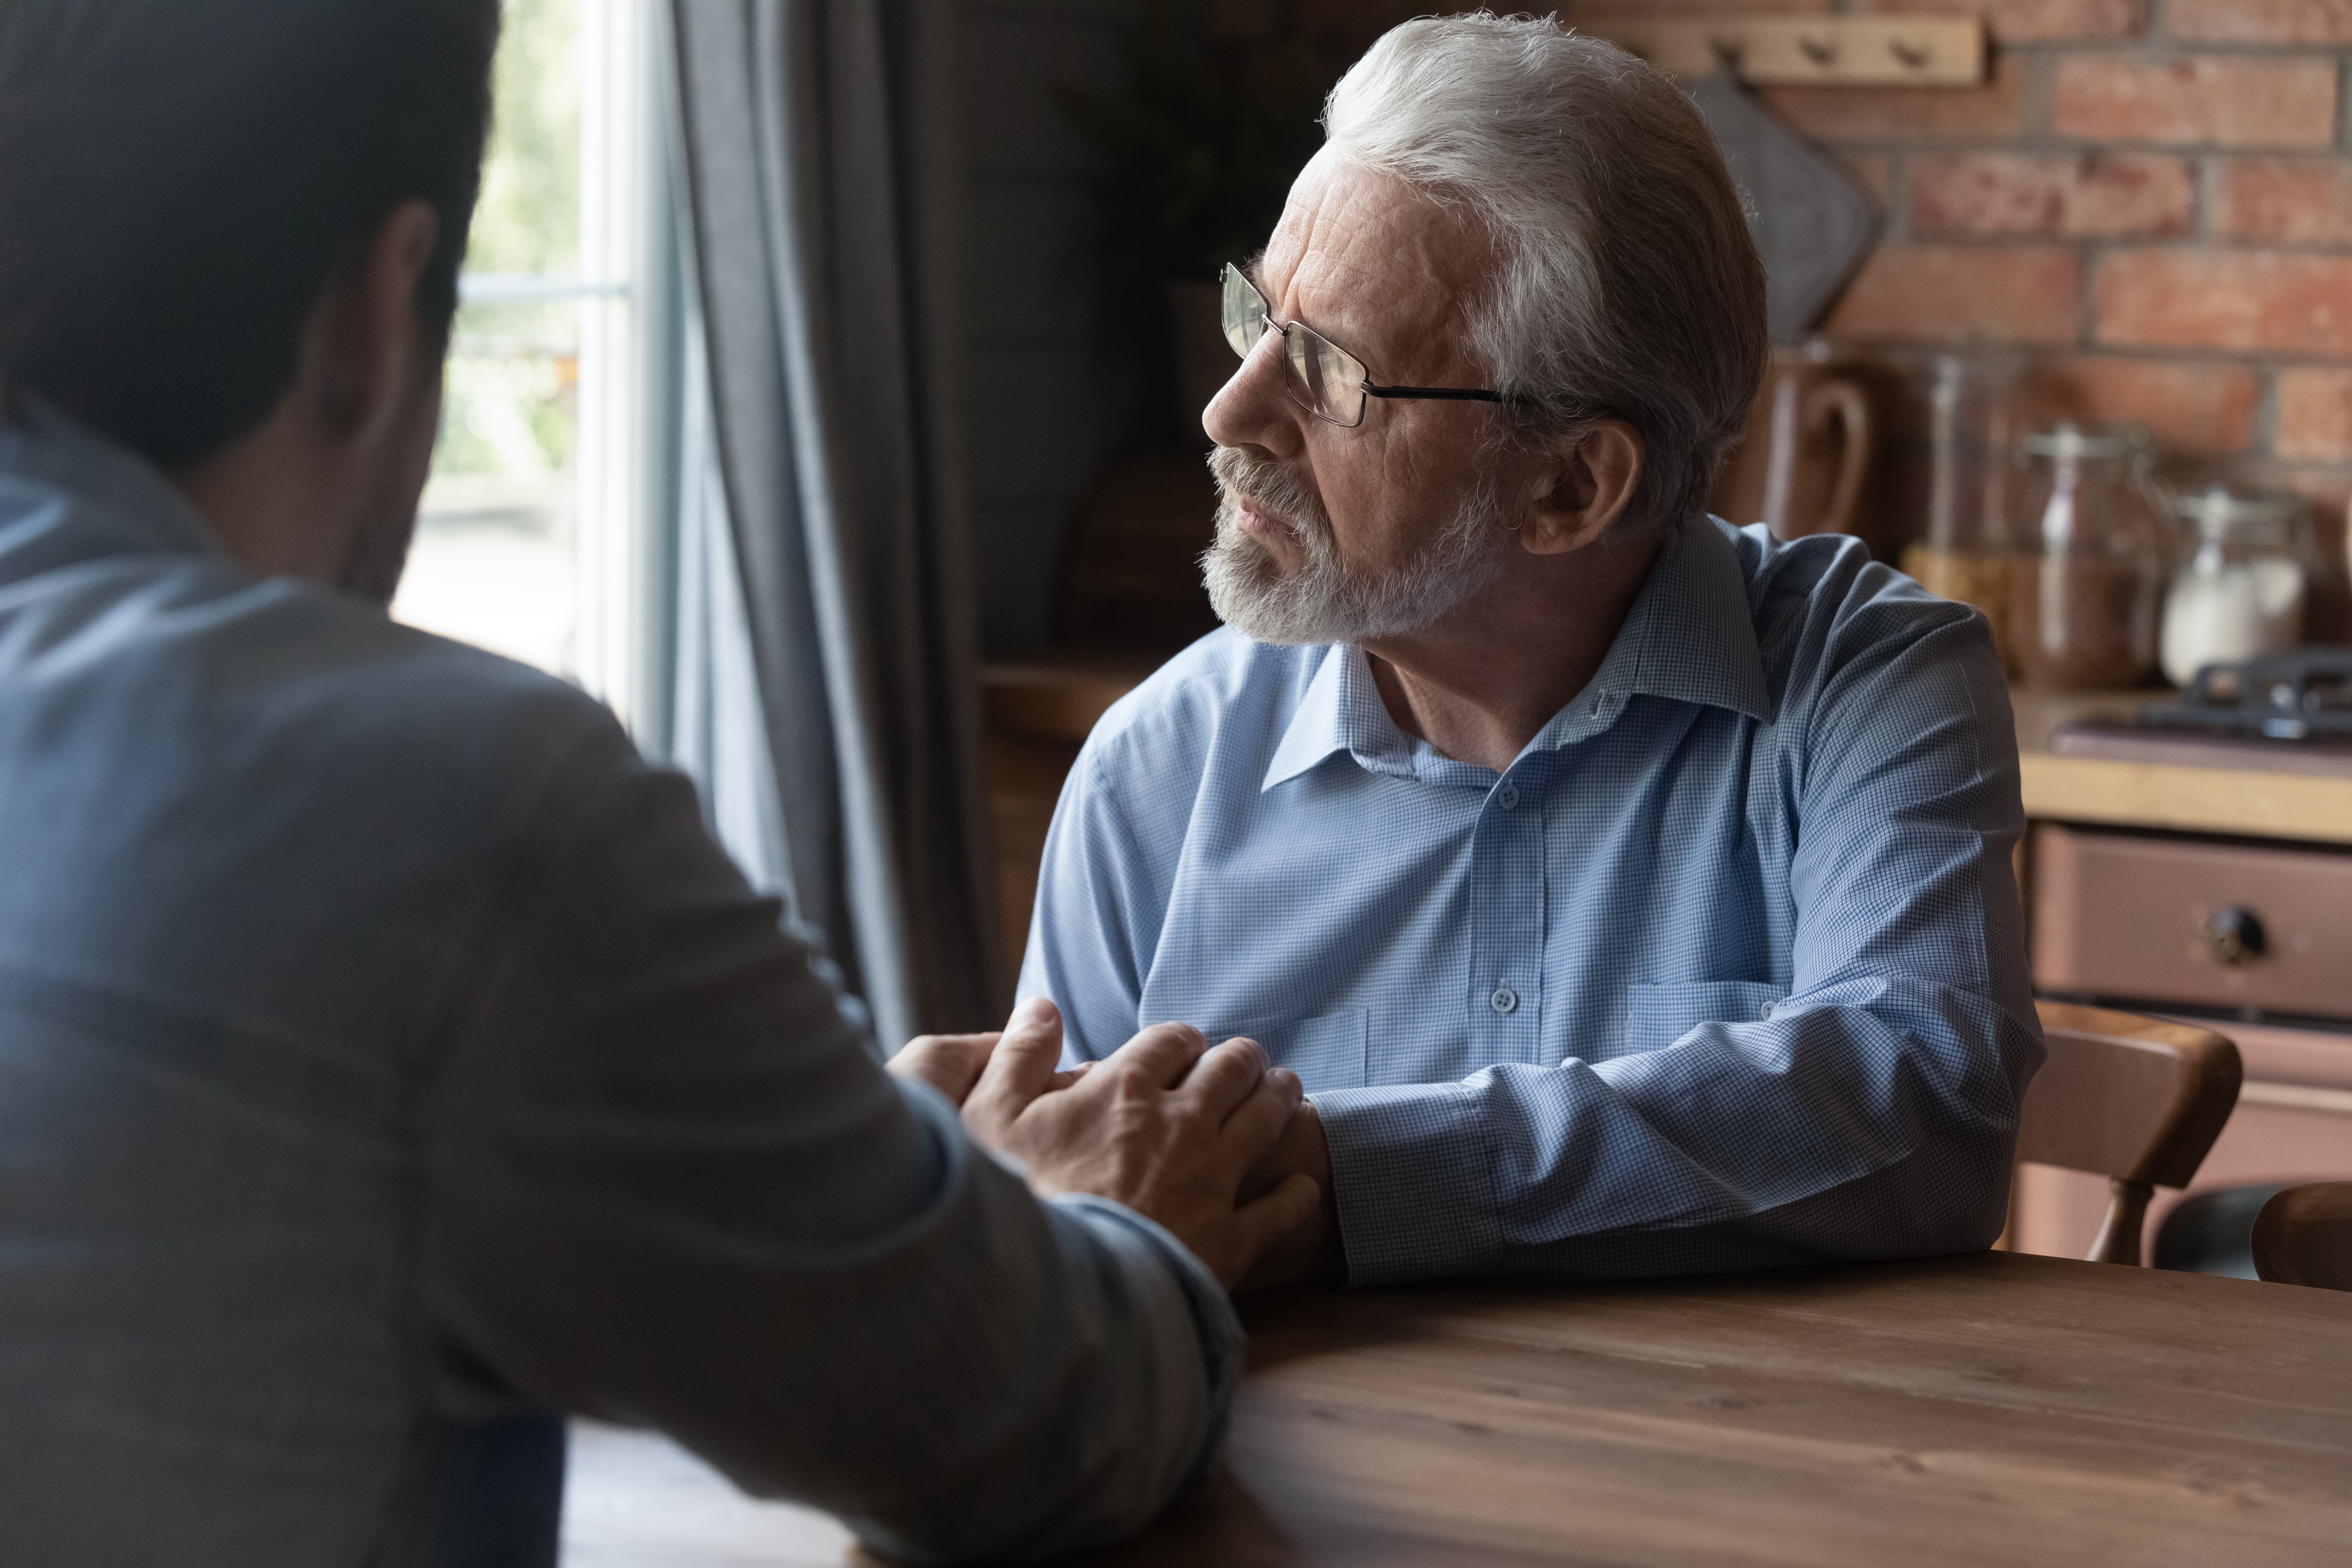 An older man looking away while a younger man speaks to him | Source: Shutterstock